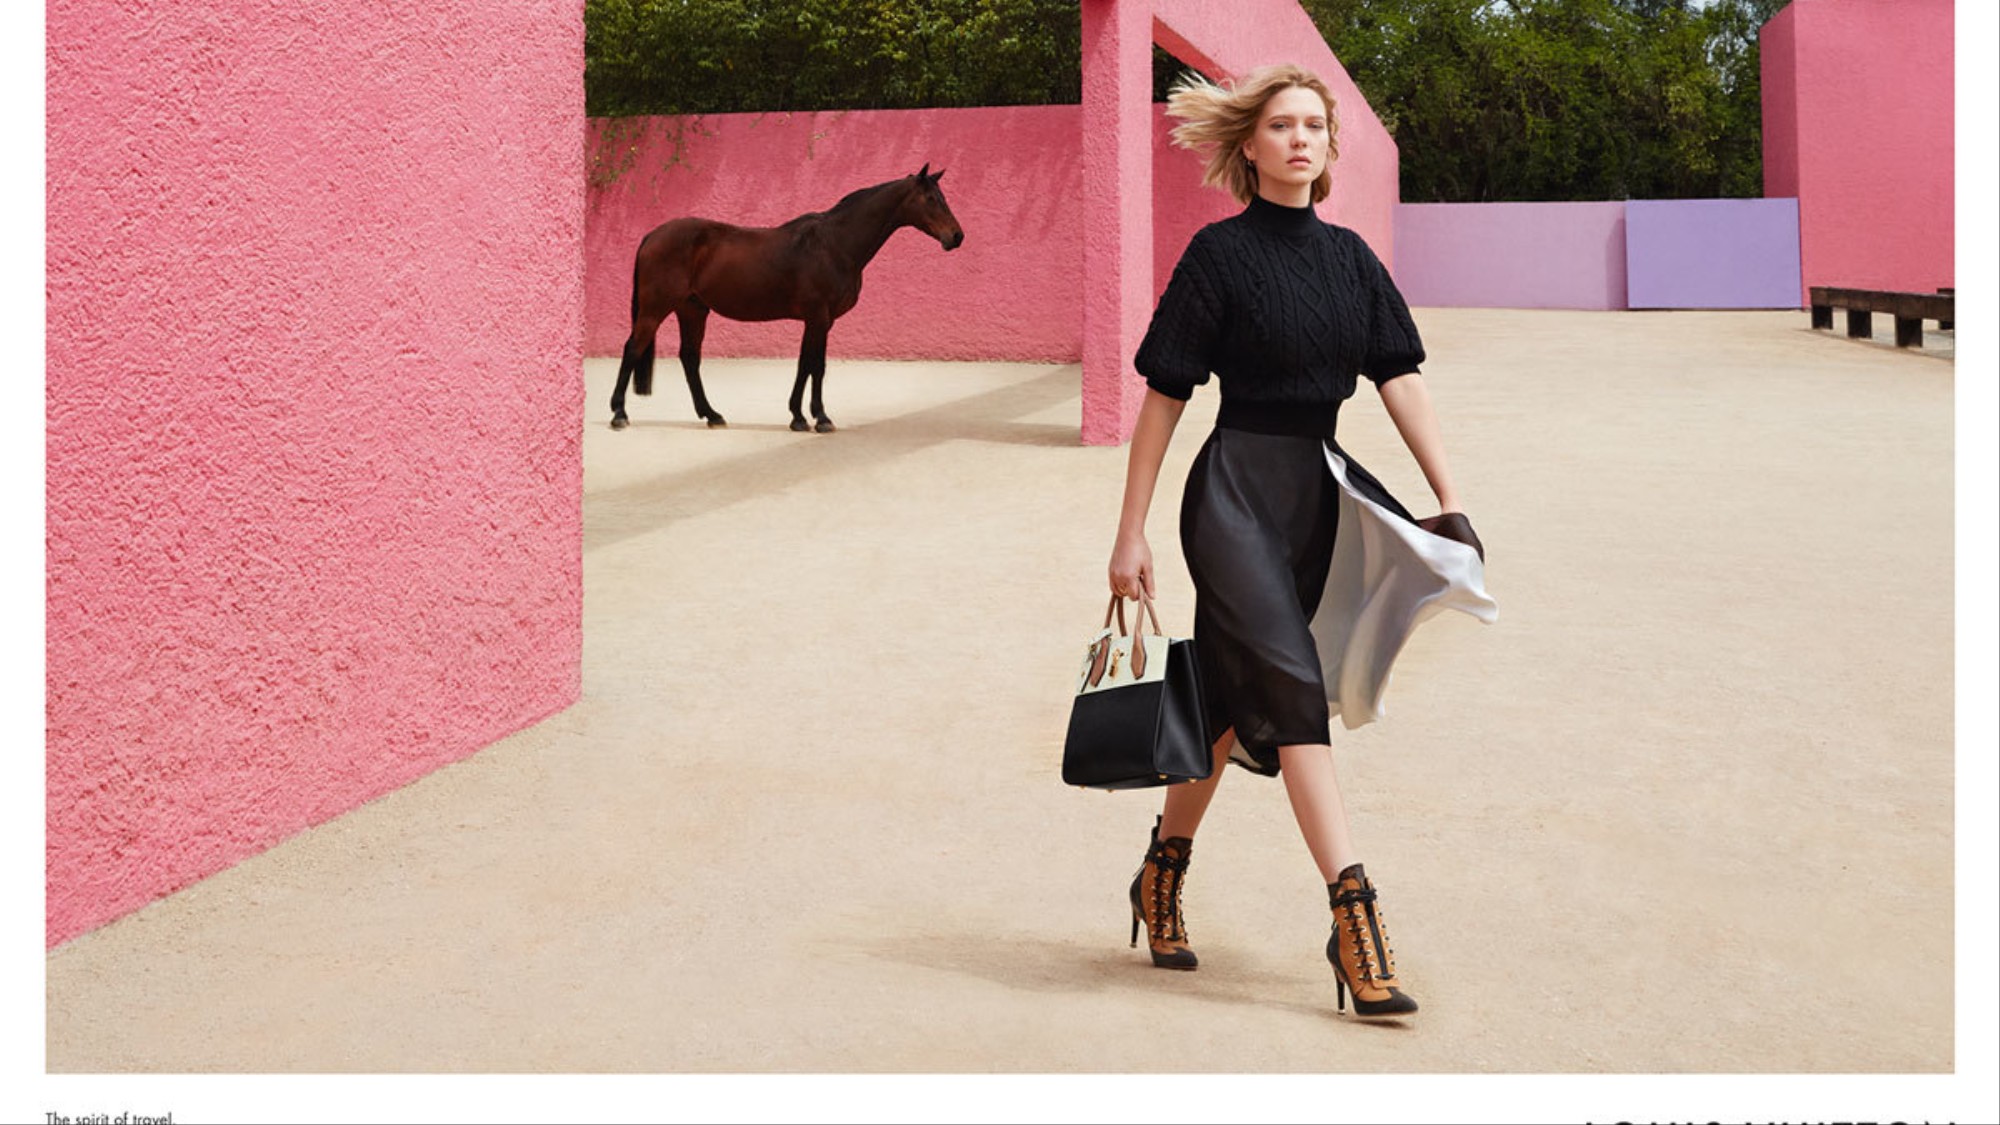 Trampe Uenighed Layouten louis vuitton sends léa seydoux to mexico for its pre-fall campaign - i-D